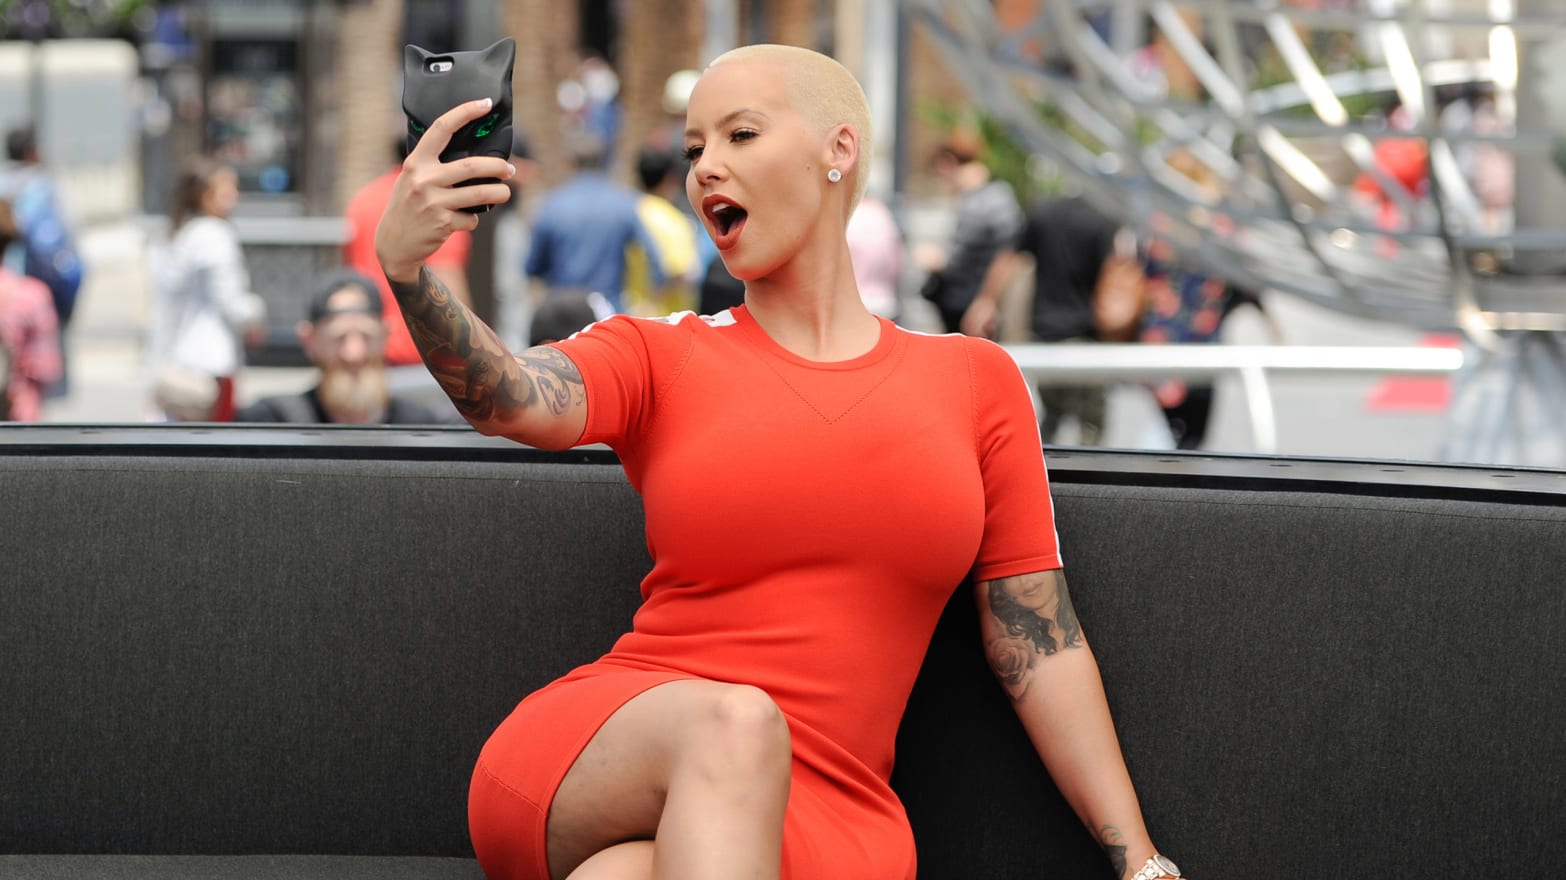 Austin Taylor Big Ass Fucked Gifs - Amber Rose on the Ian Connor Rape Allegations: '21 Women Have Reached Out  to Me So Far'